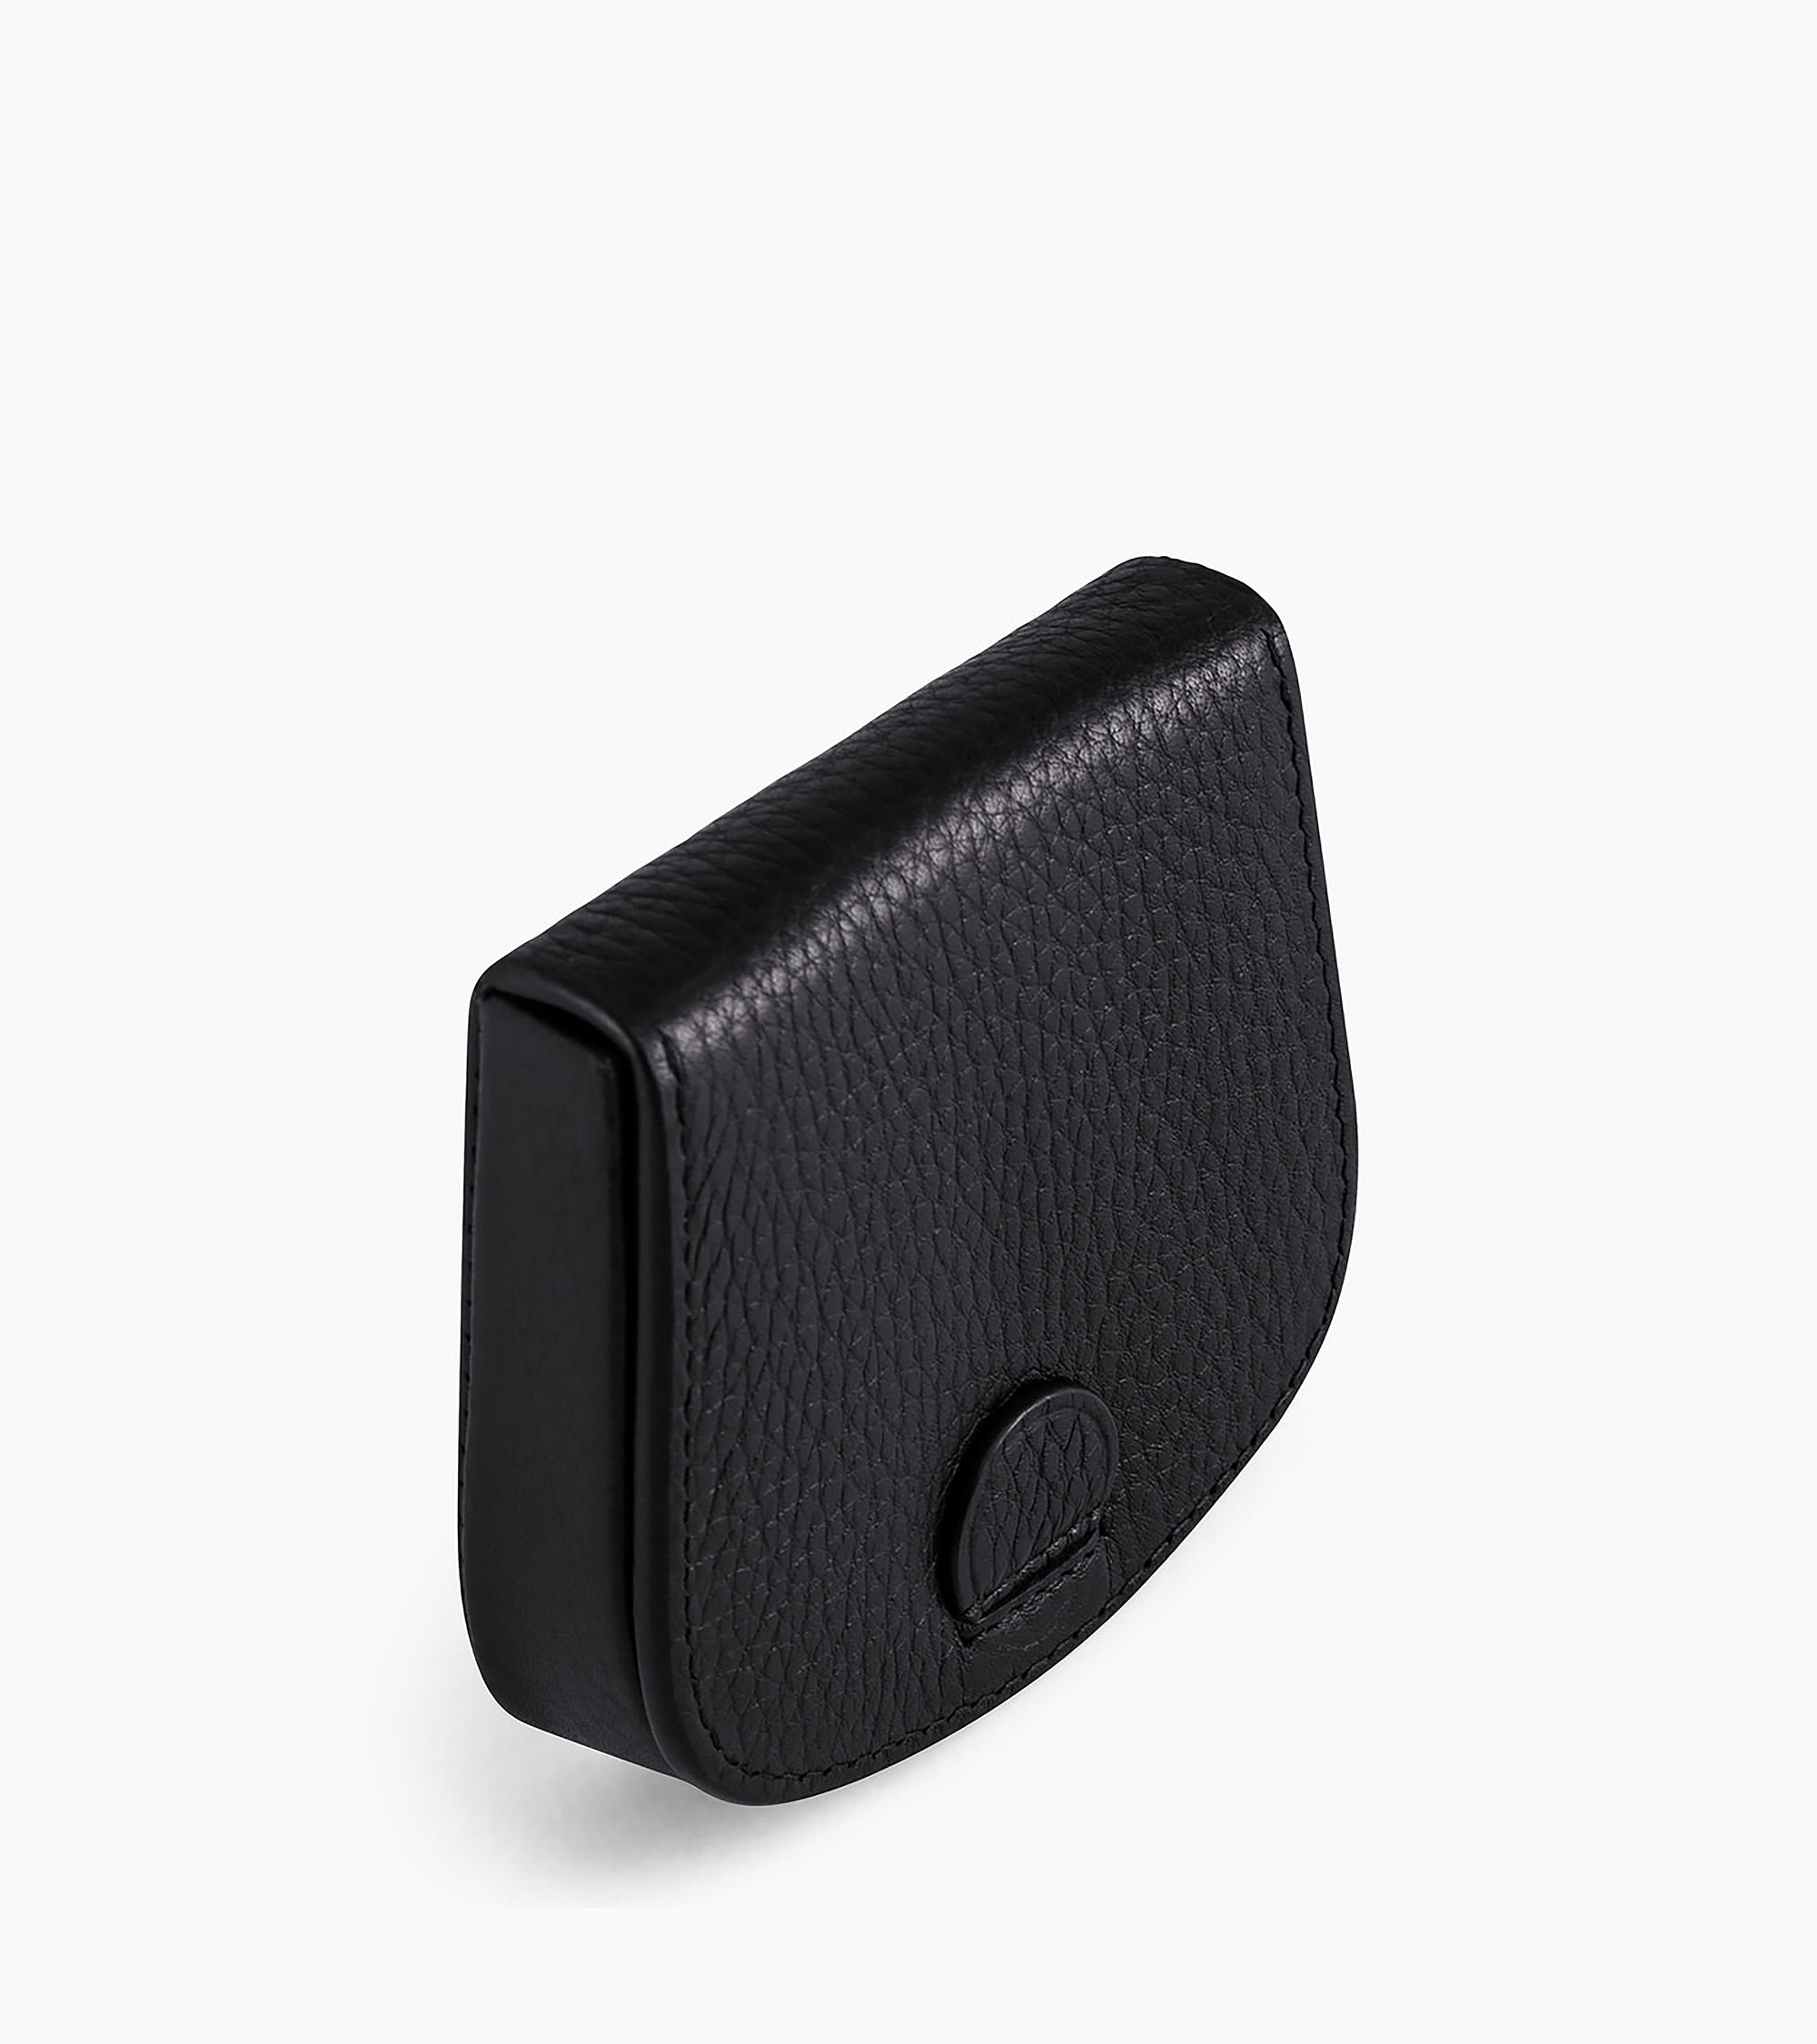 Charles bowl coin purse in grained leather